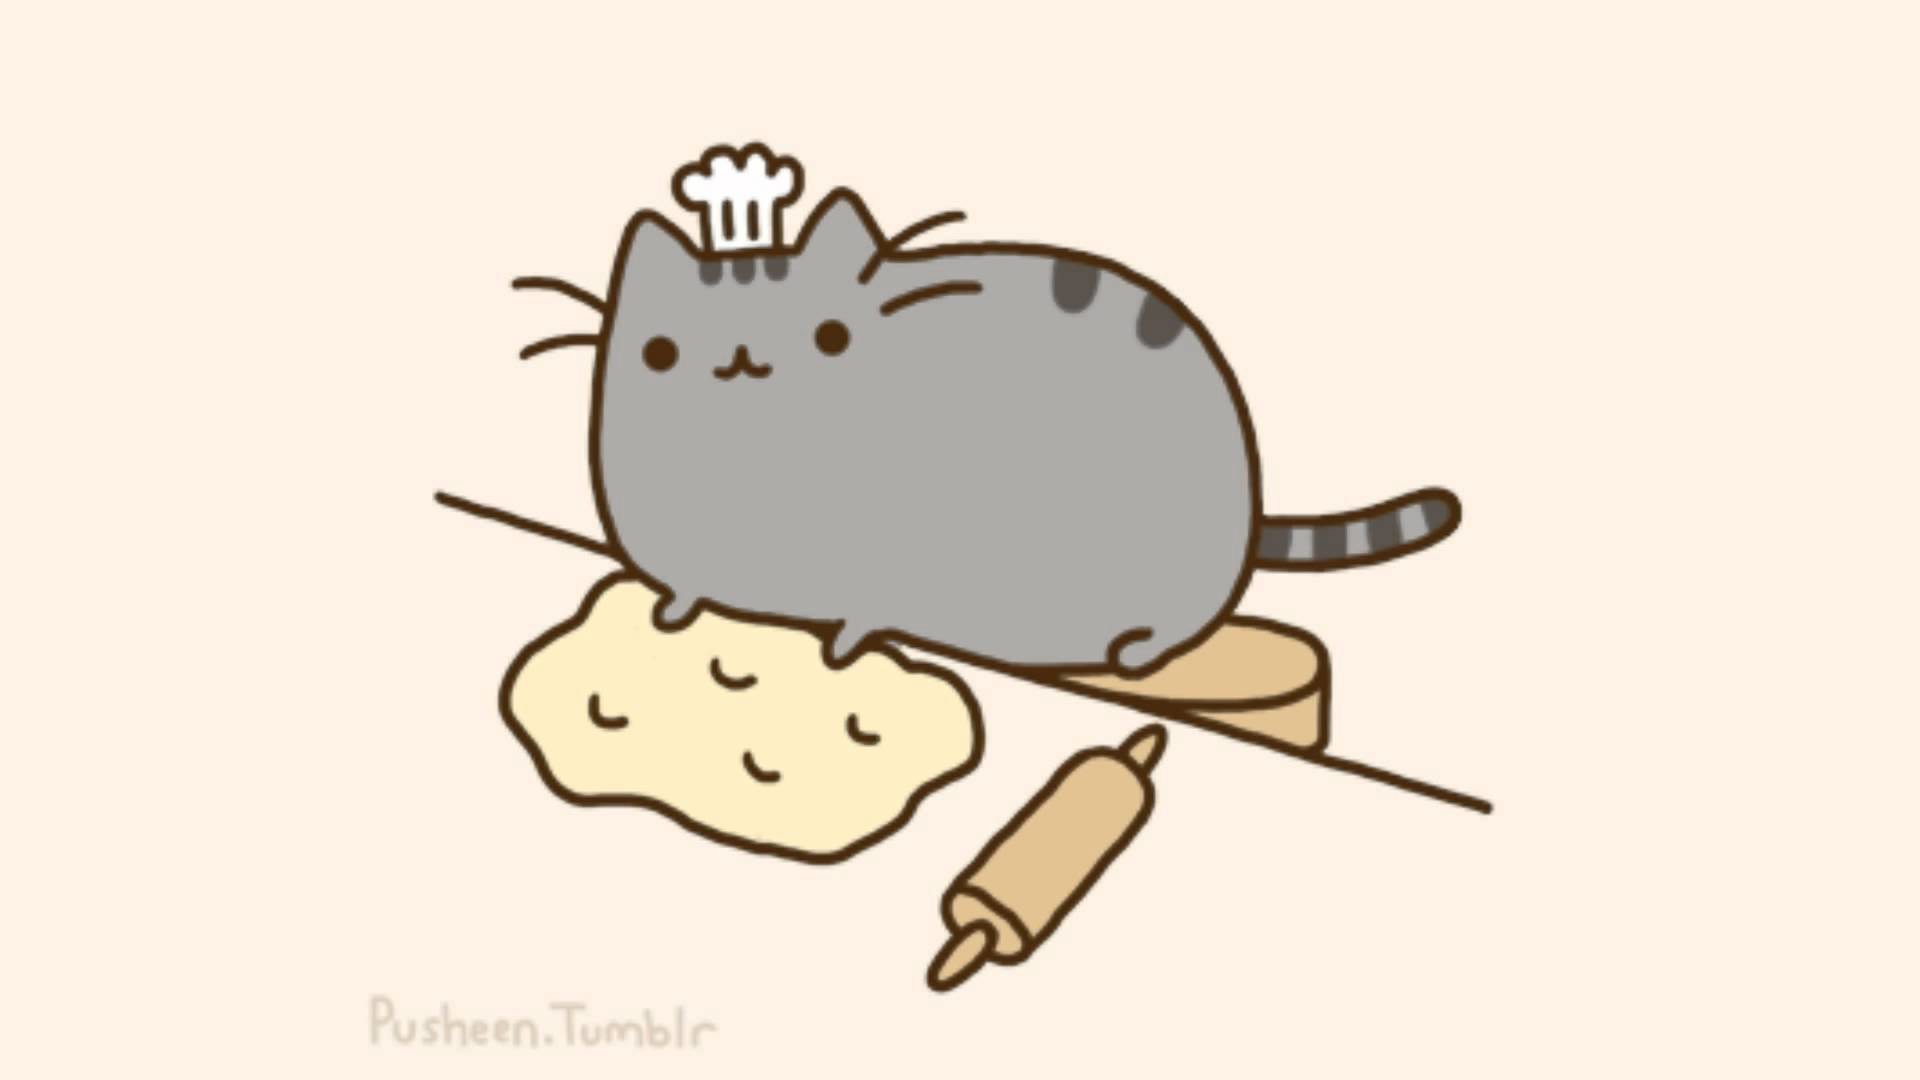 1920x1080 Go Back > Images For > Pusheen The Cat Wallpaper